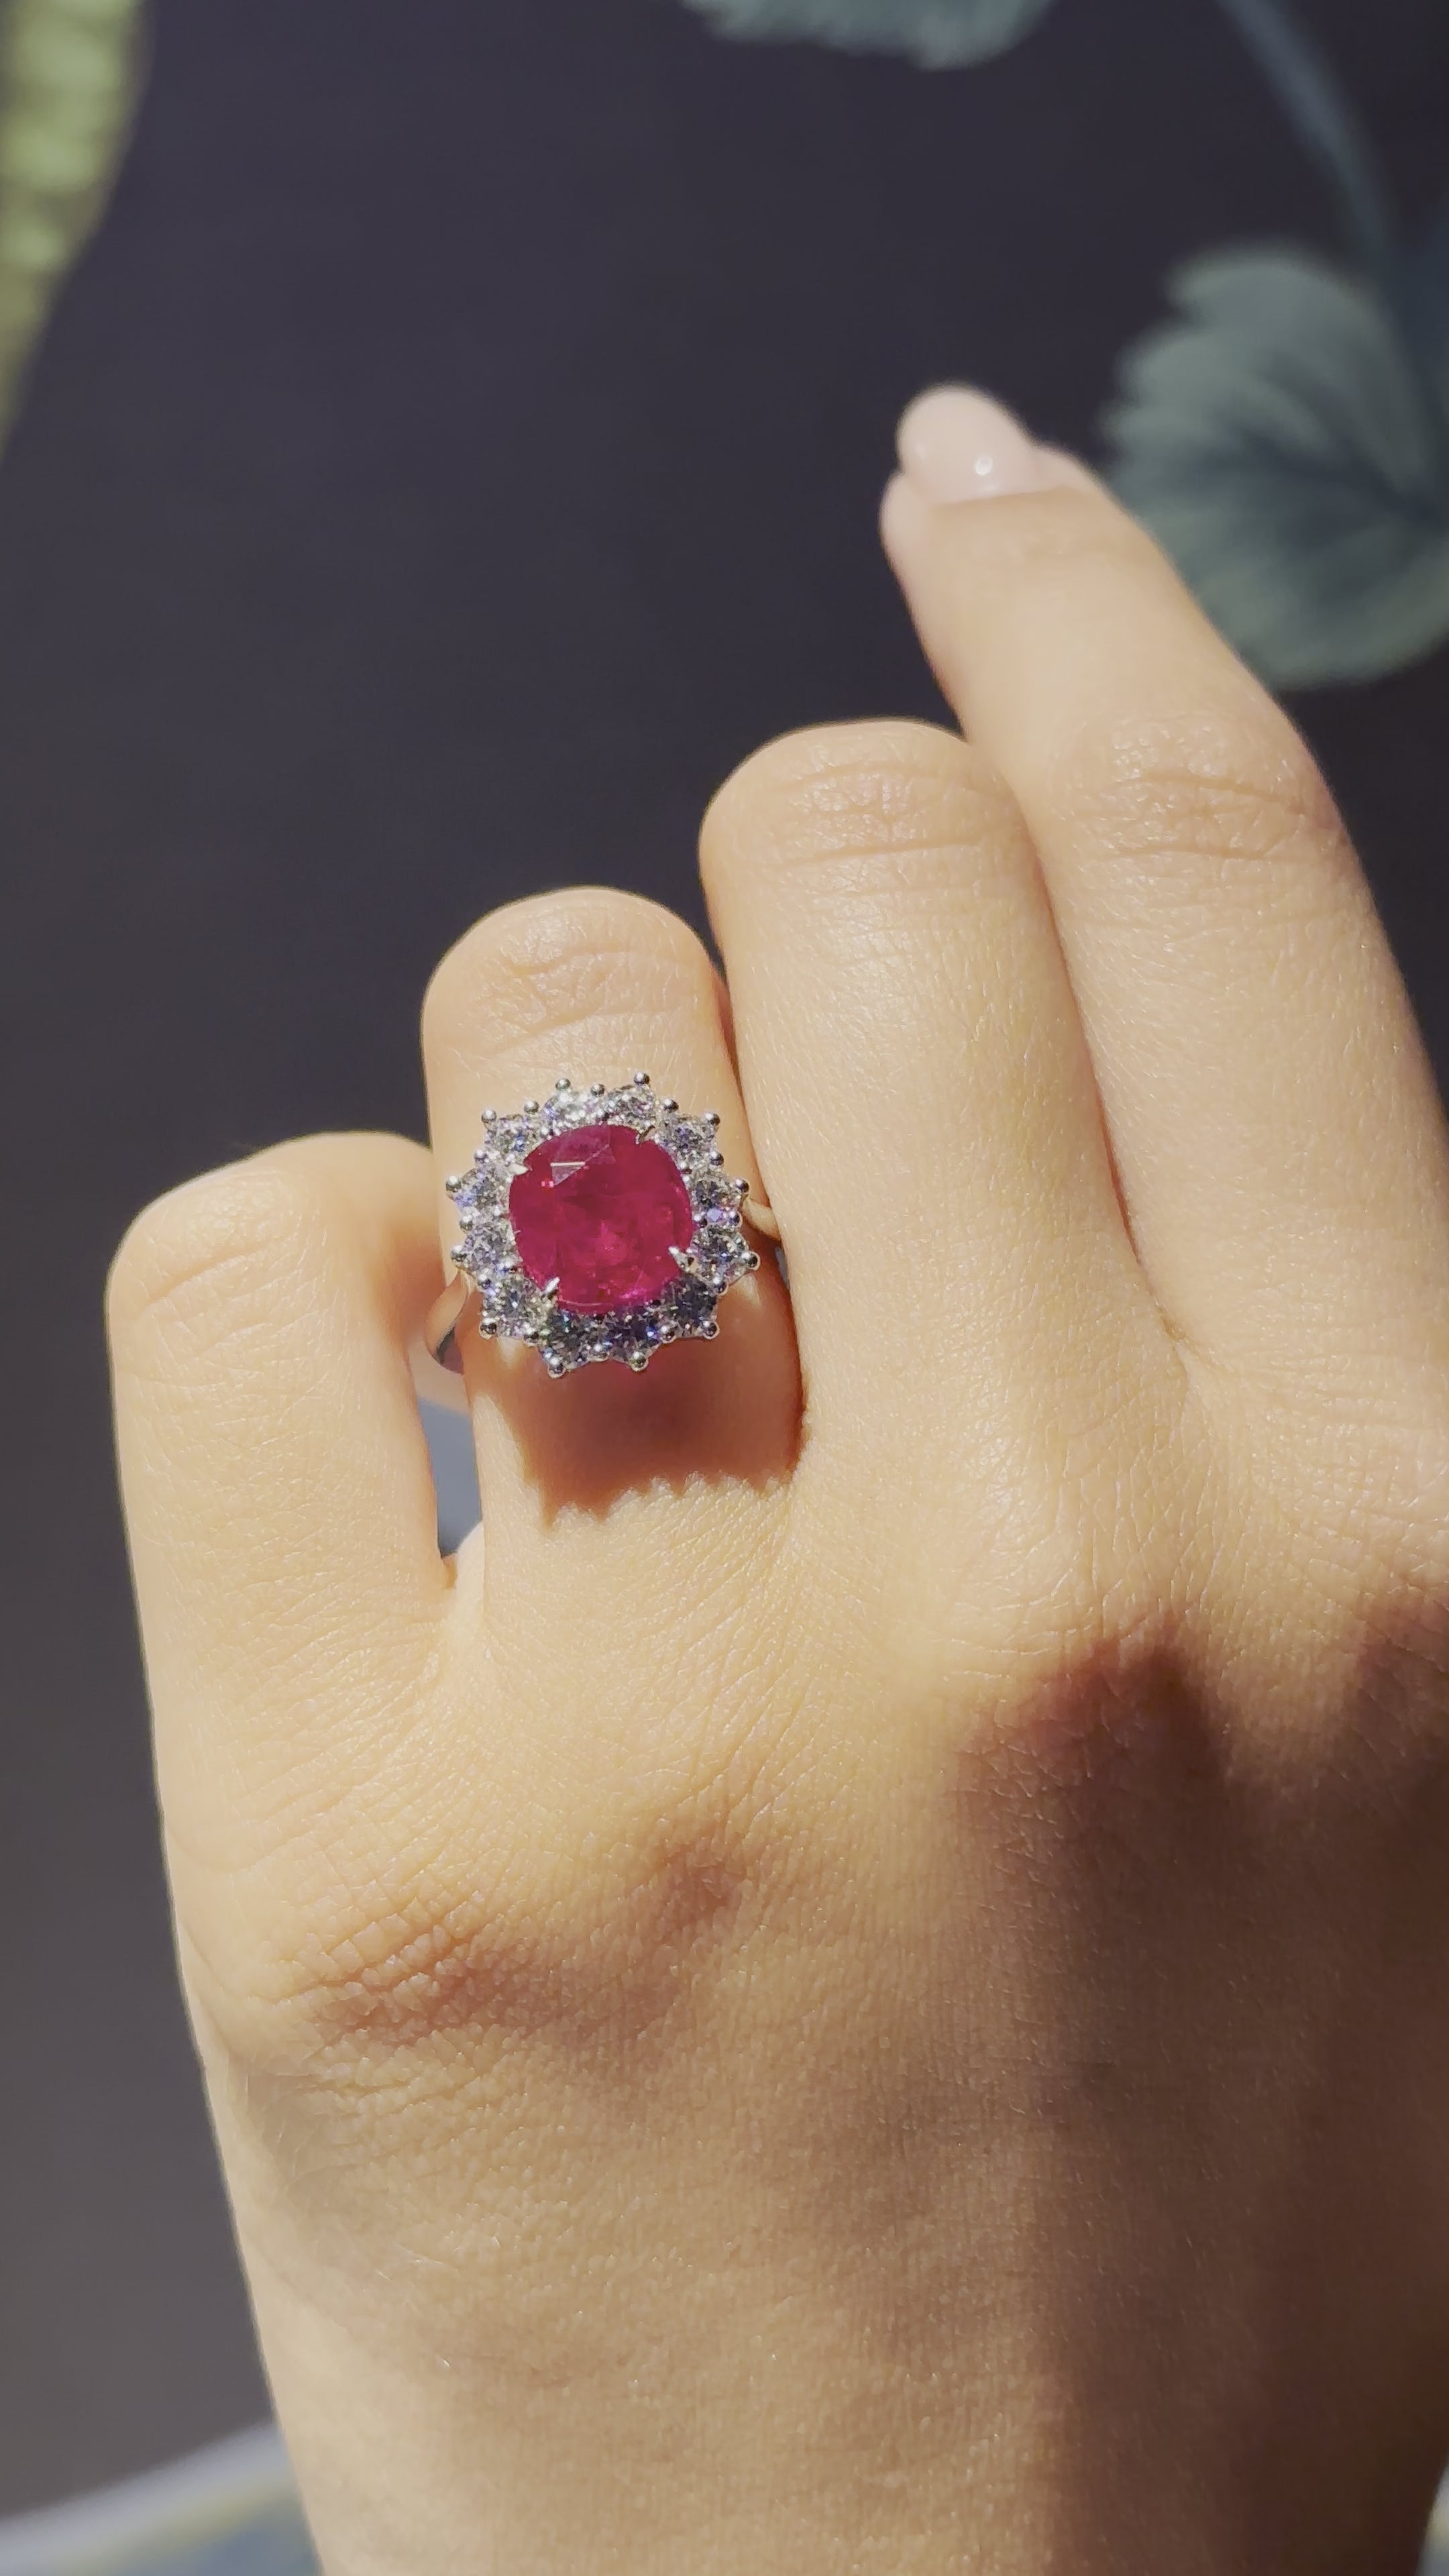 4.01cts Cushion-Shape Ruby and Diamond Cluster Ring